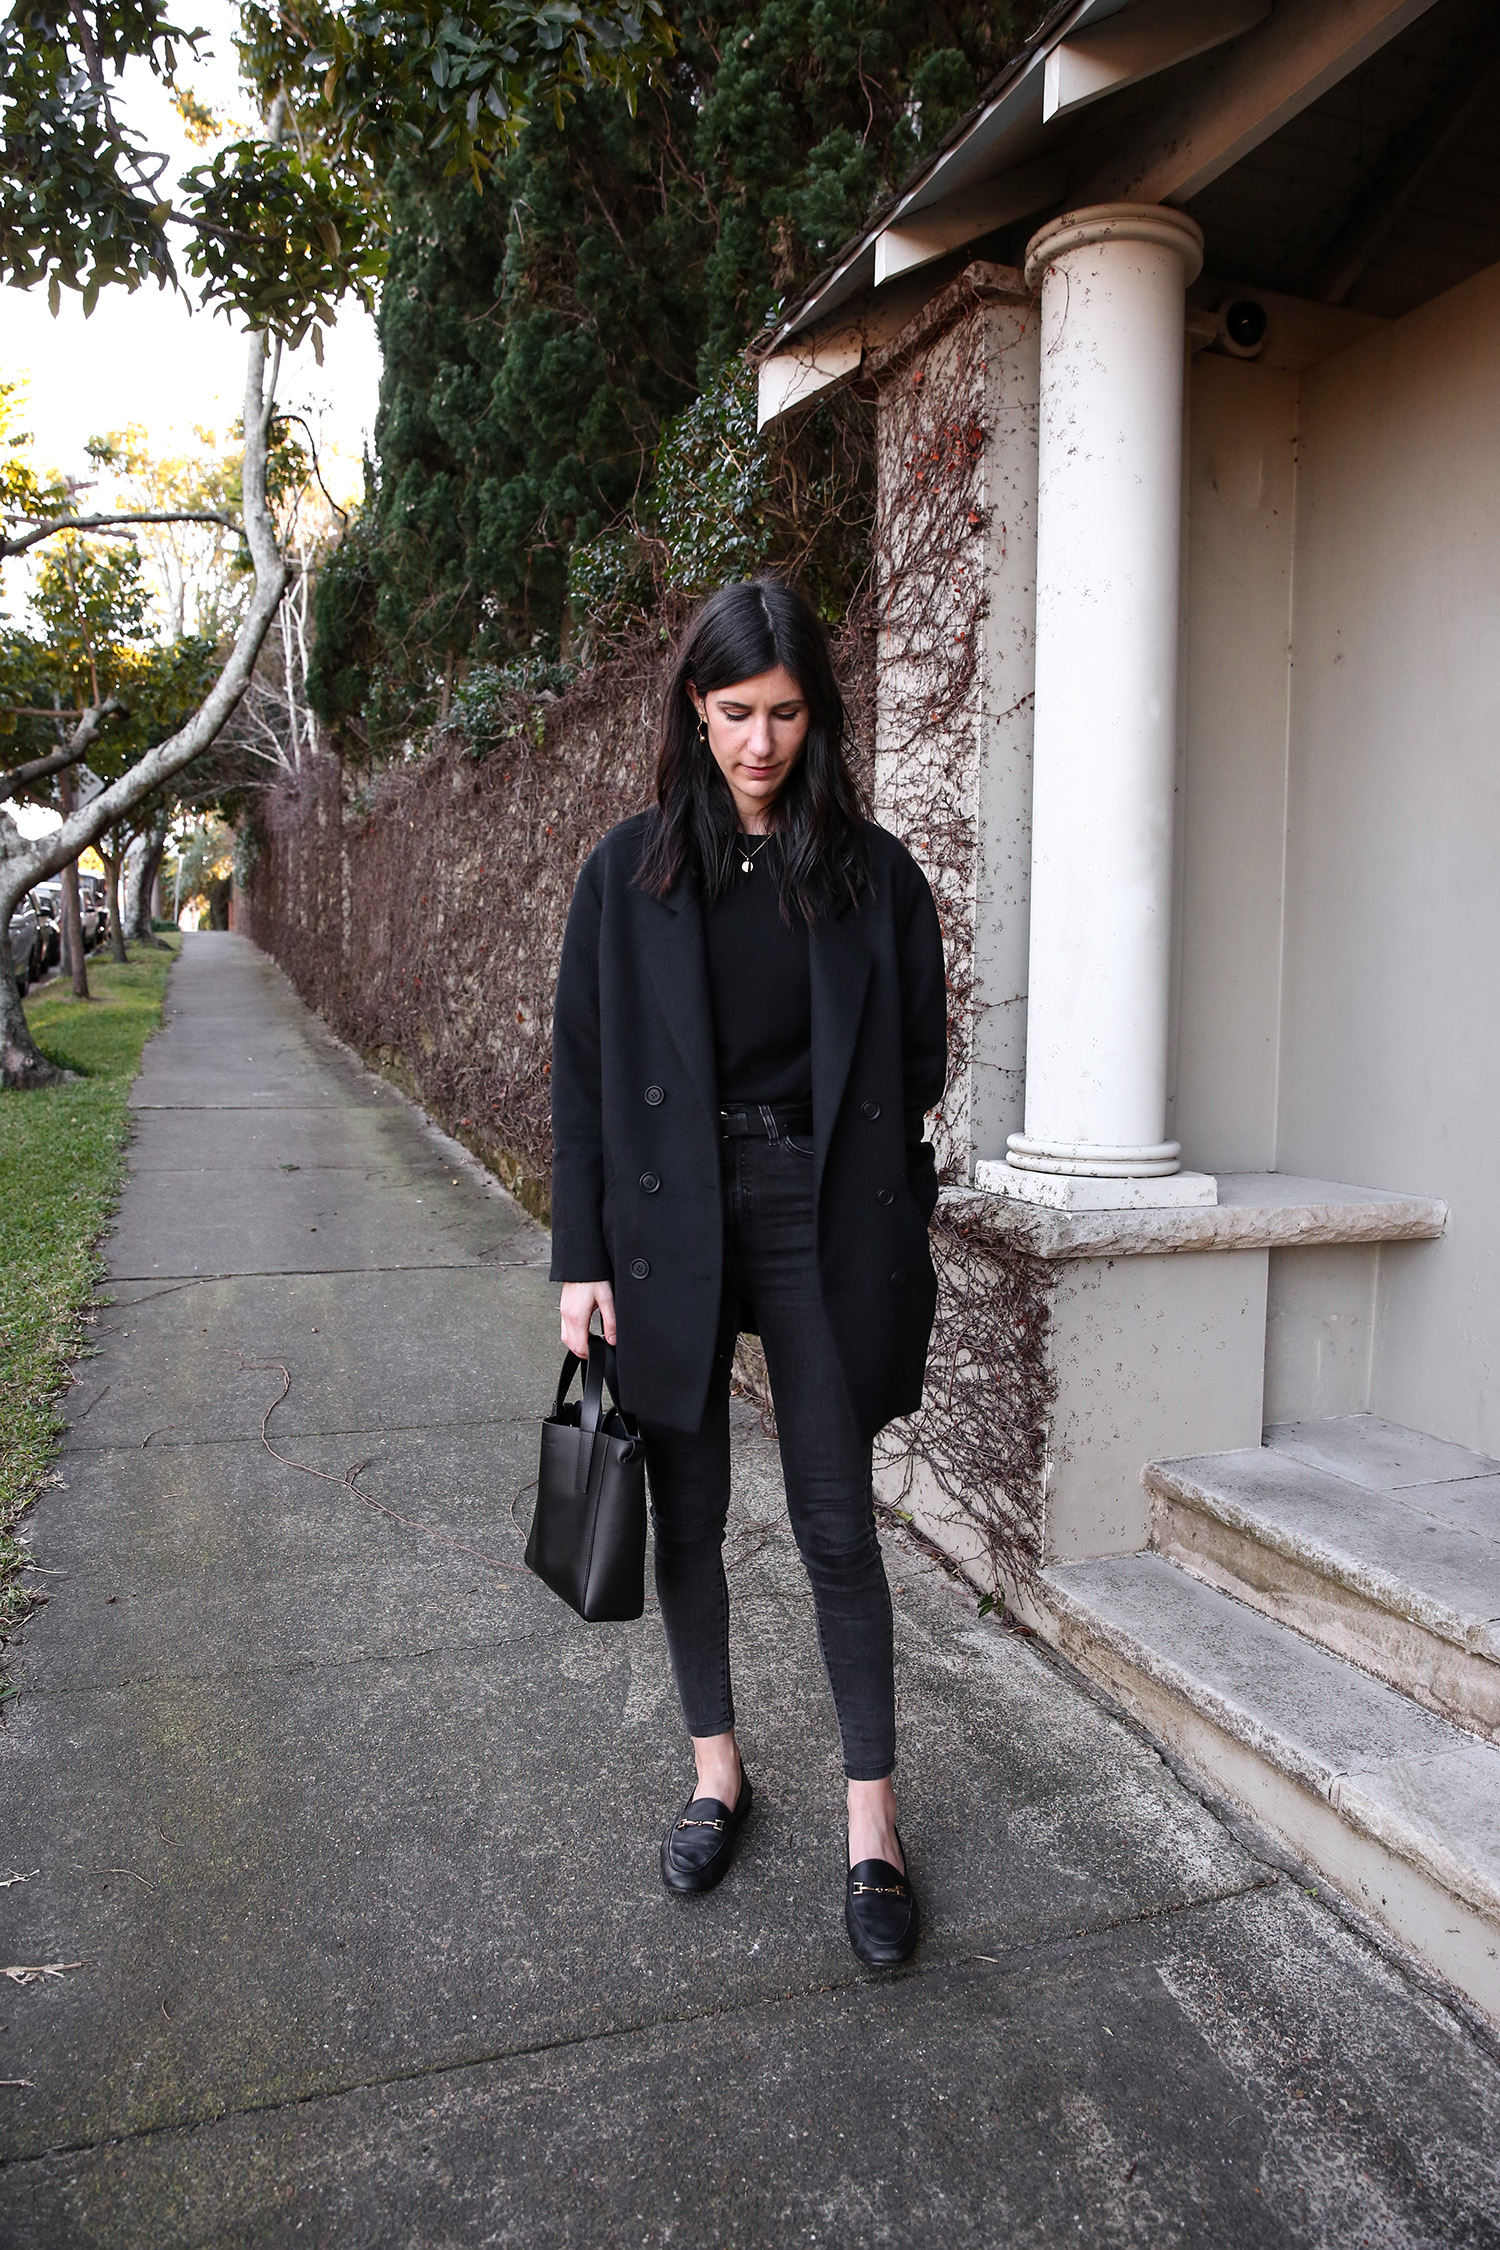 Scandi style head to toe black outfit